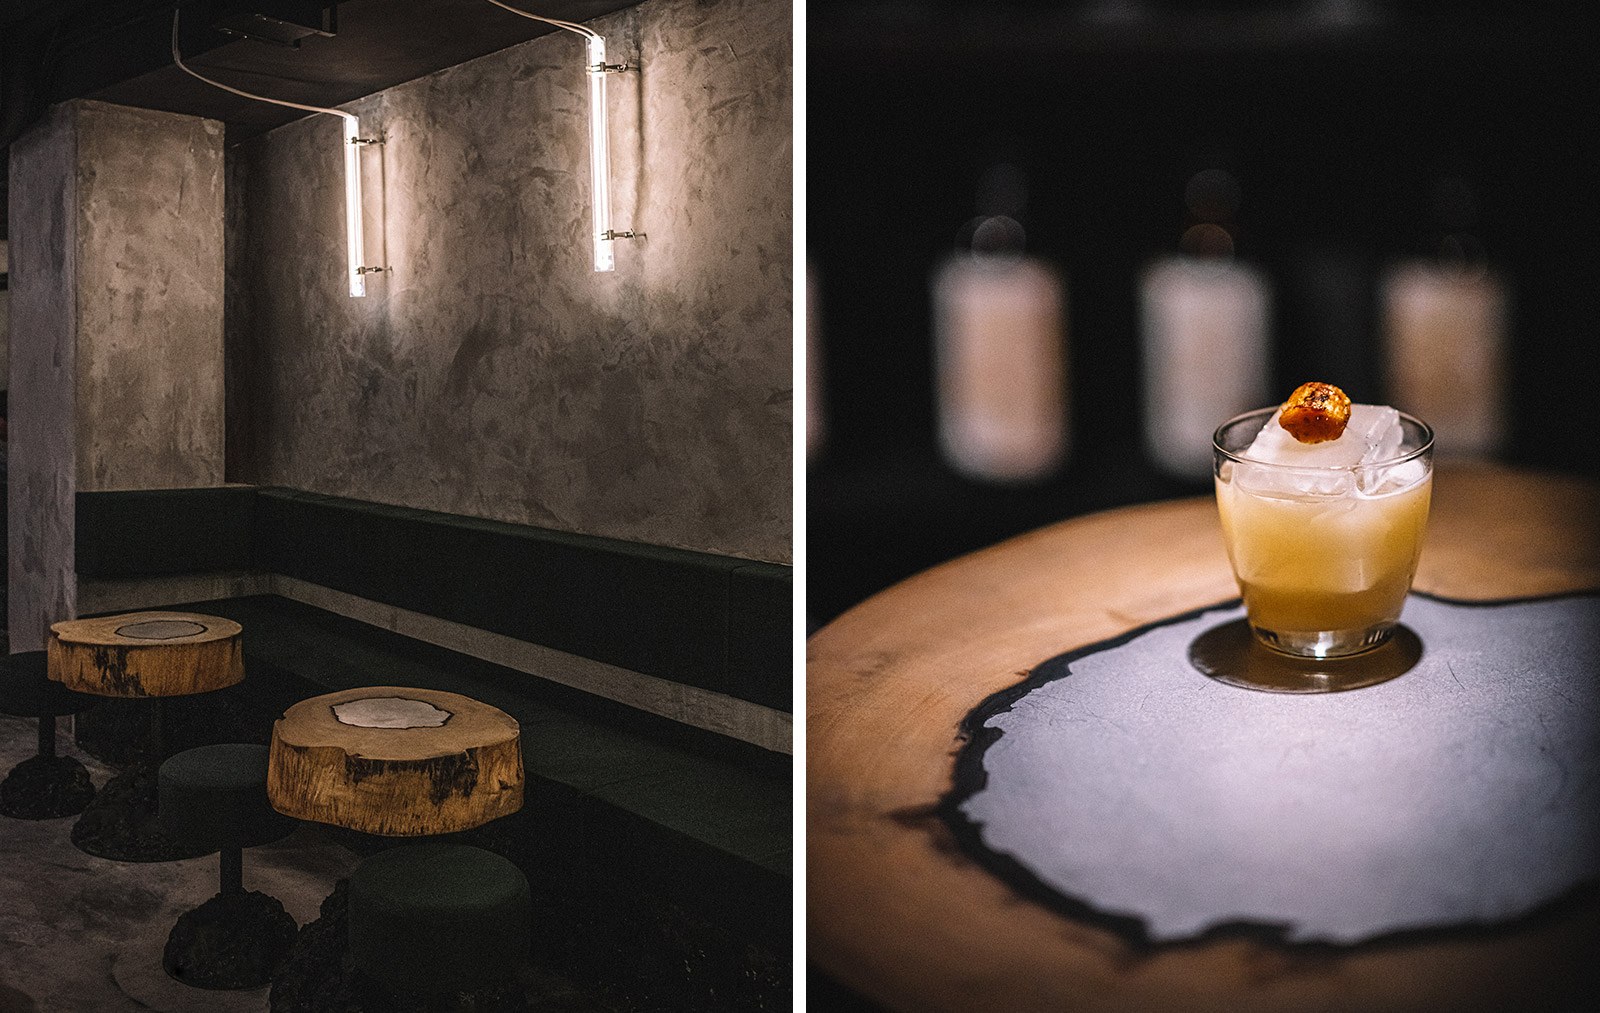 Interior and cocktails at Penicillin, one of Hong Kong's hottest